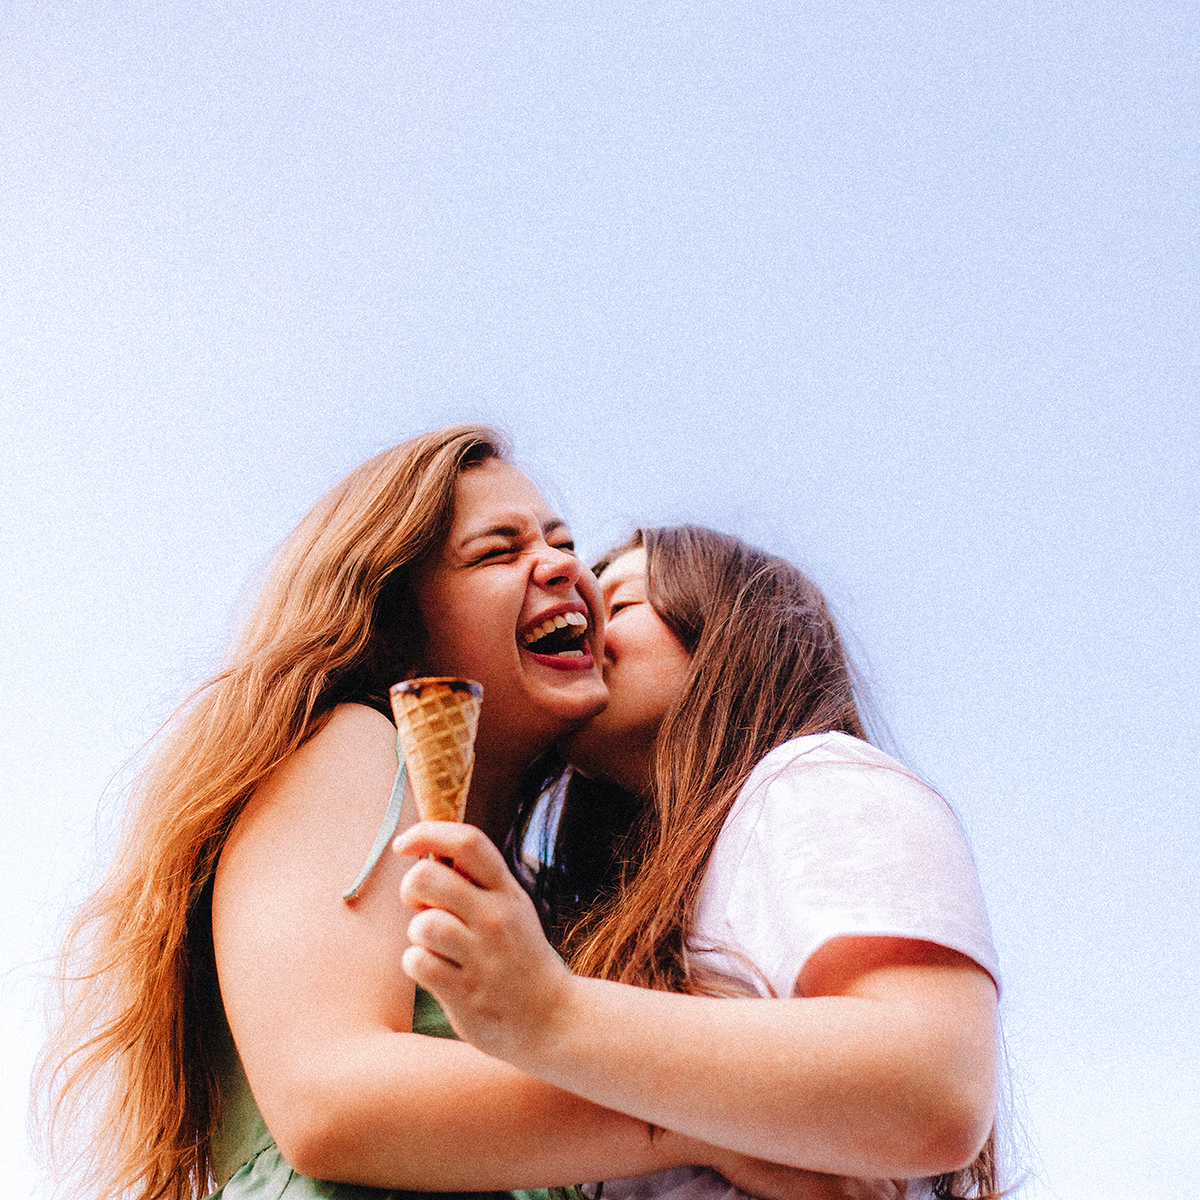 8 Lesbian Dating Apps â€” 8 Free Lesbian Dating Apps